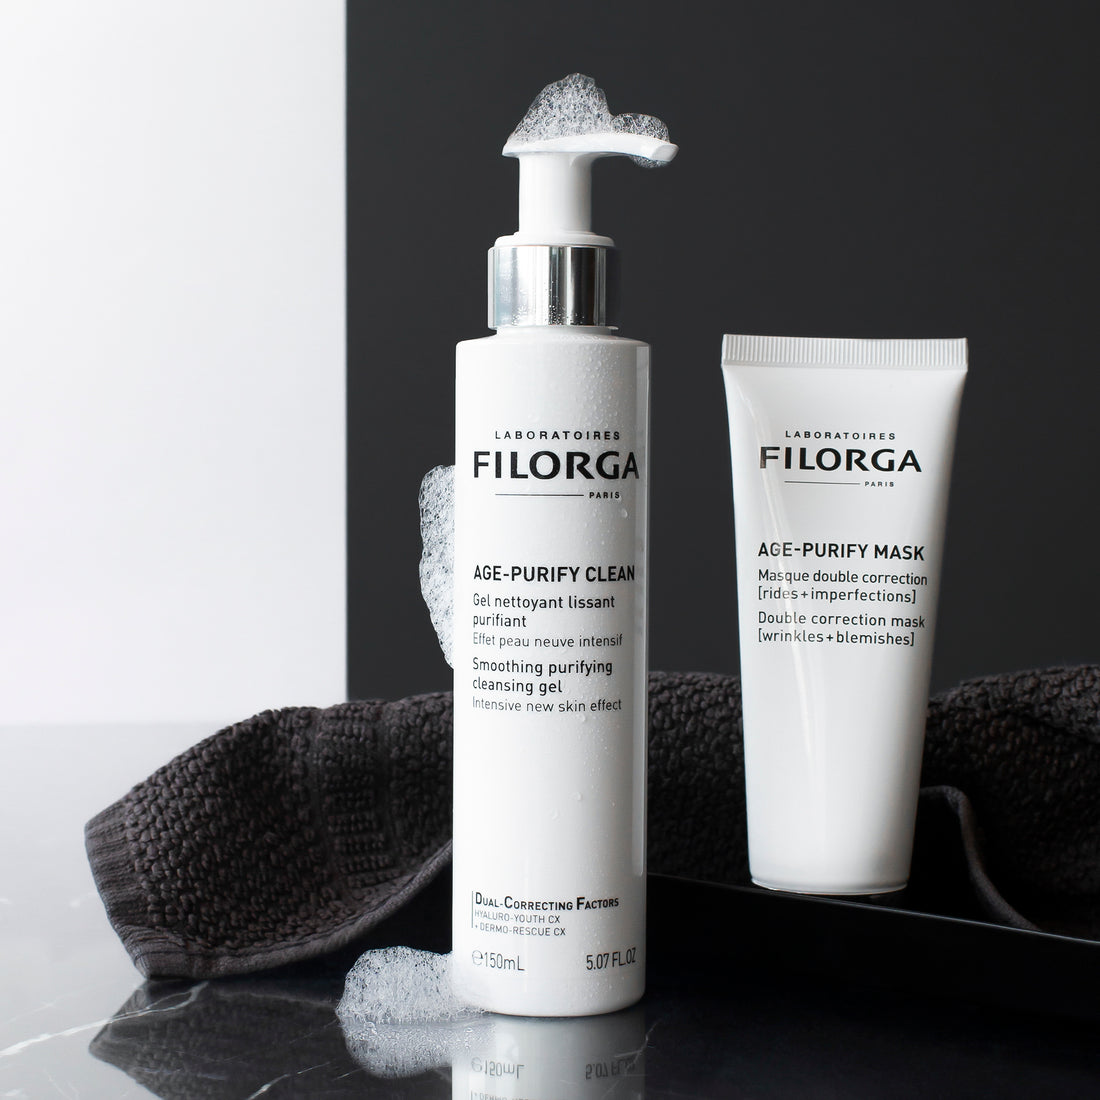 FILORGA's Age-Purify Clean gel cleanser and Age-Purify Mask for combination skin